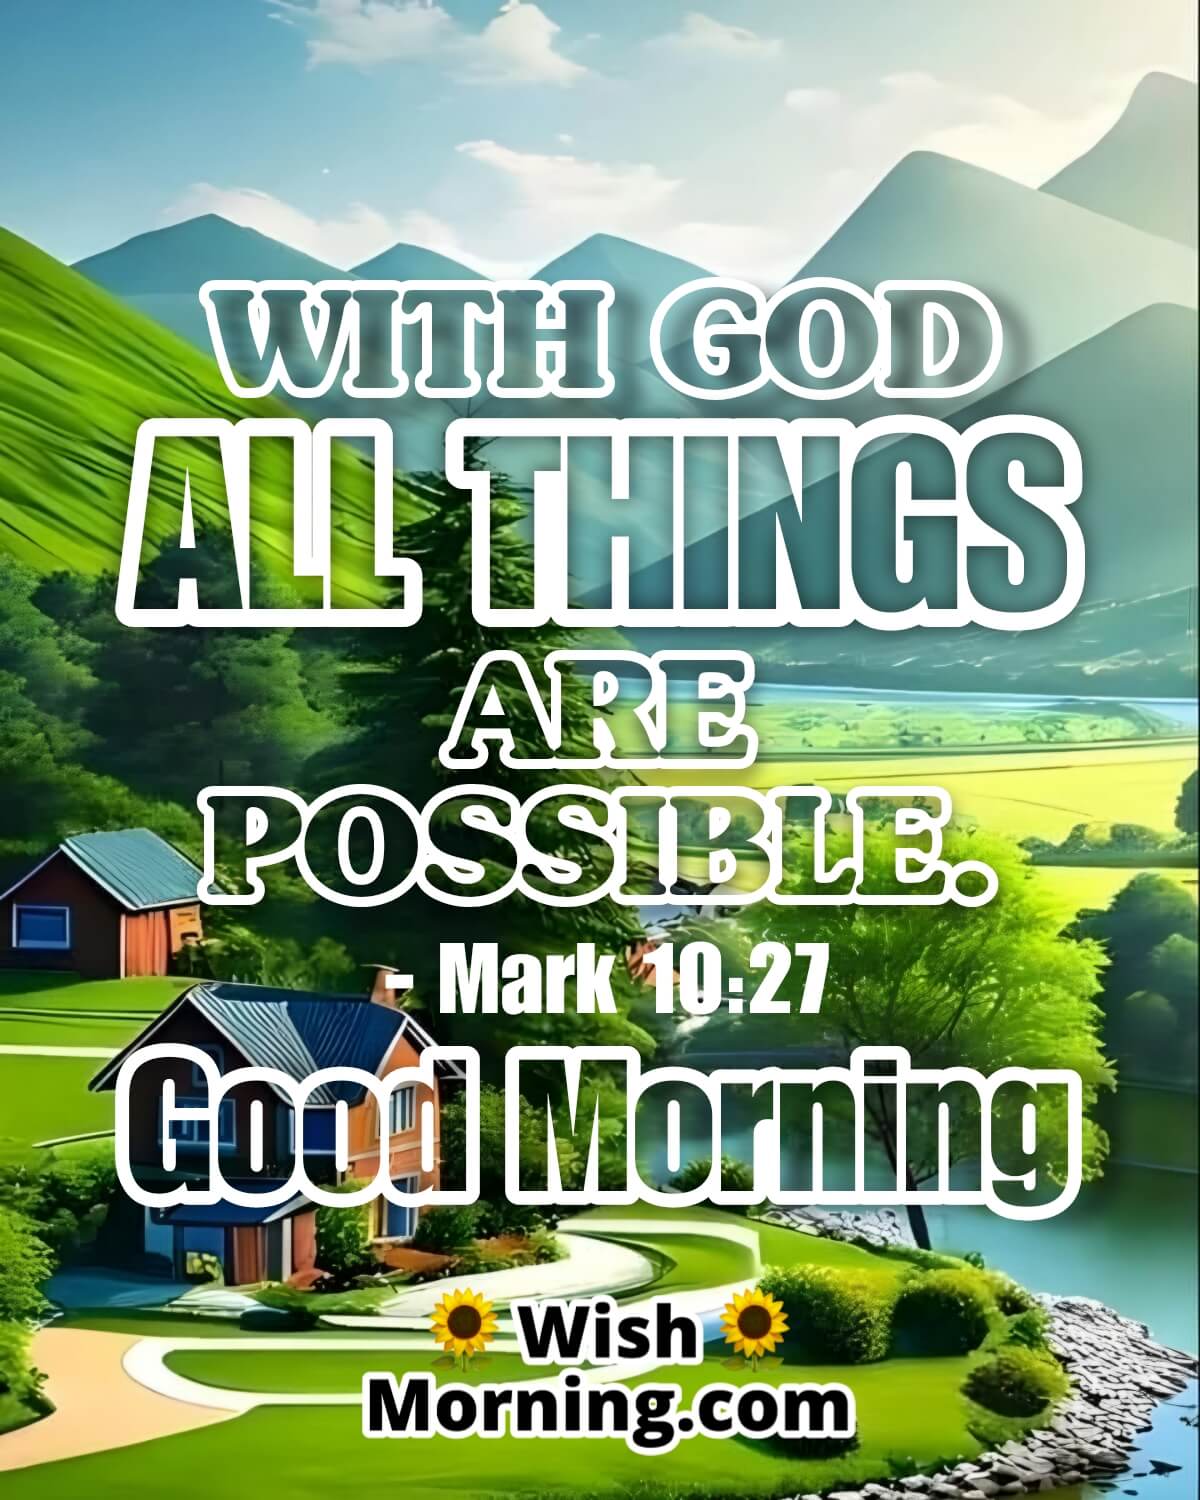 good morning message with god